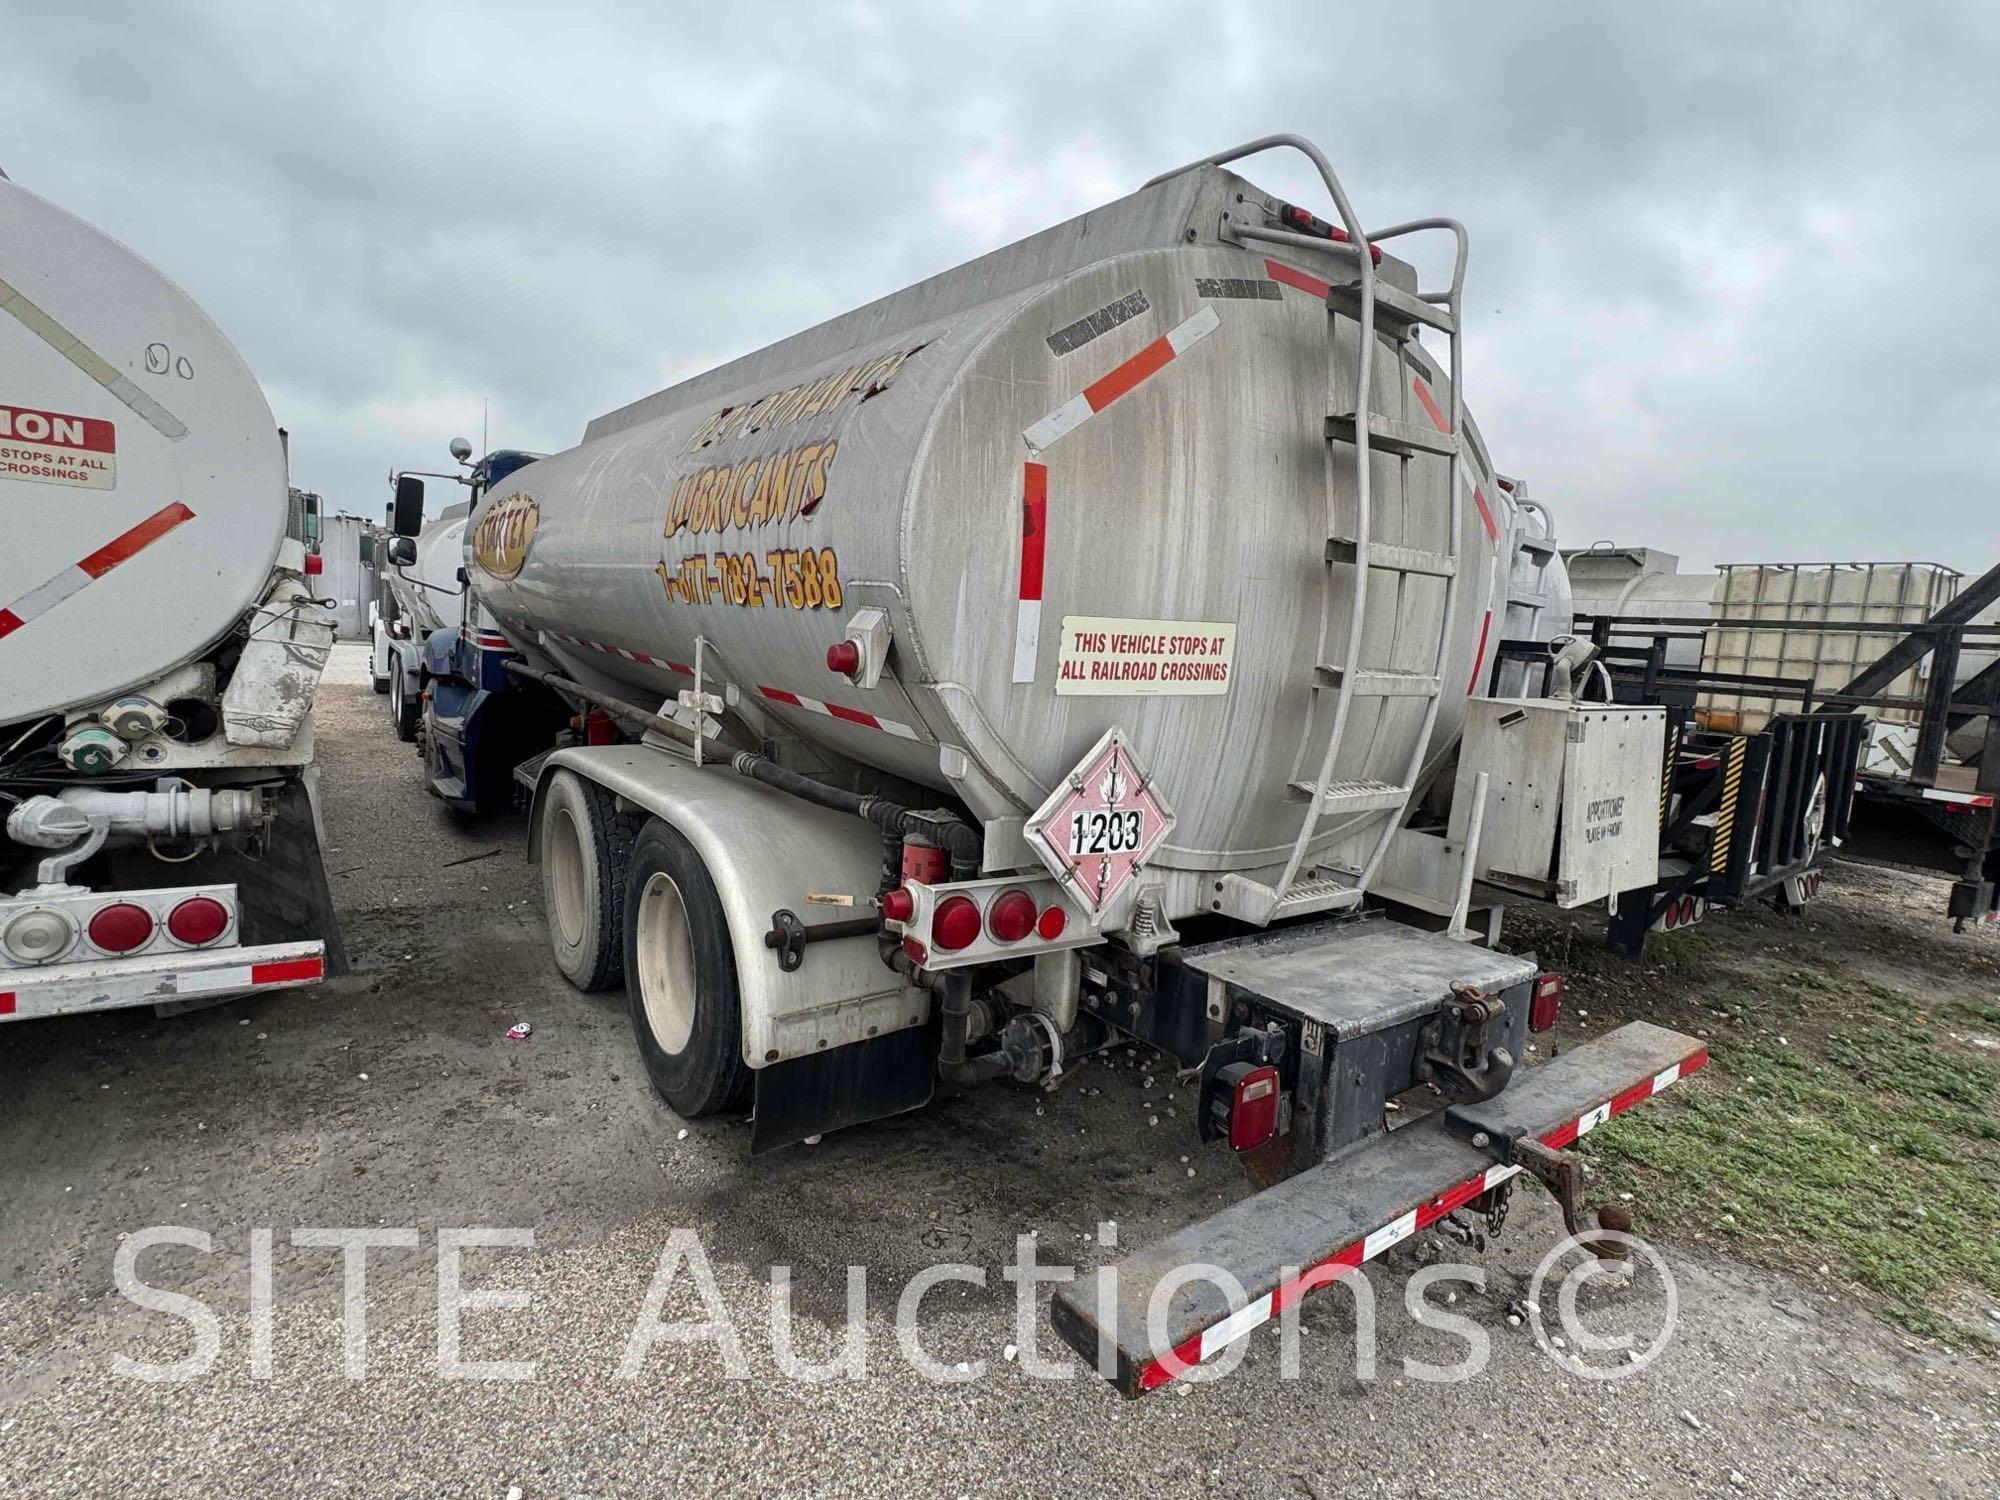 2004 Freightliner Columbia T/A Fuel Truck